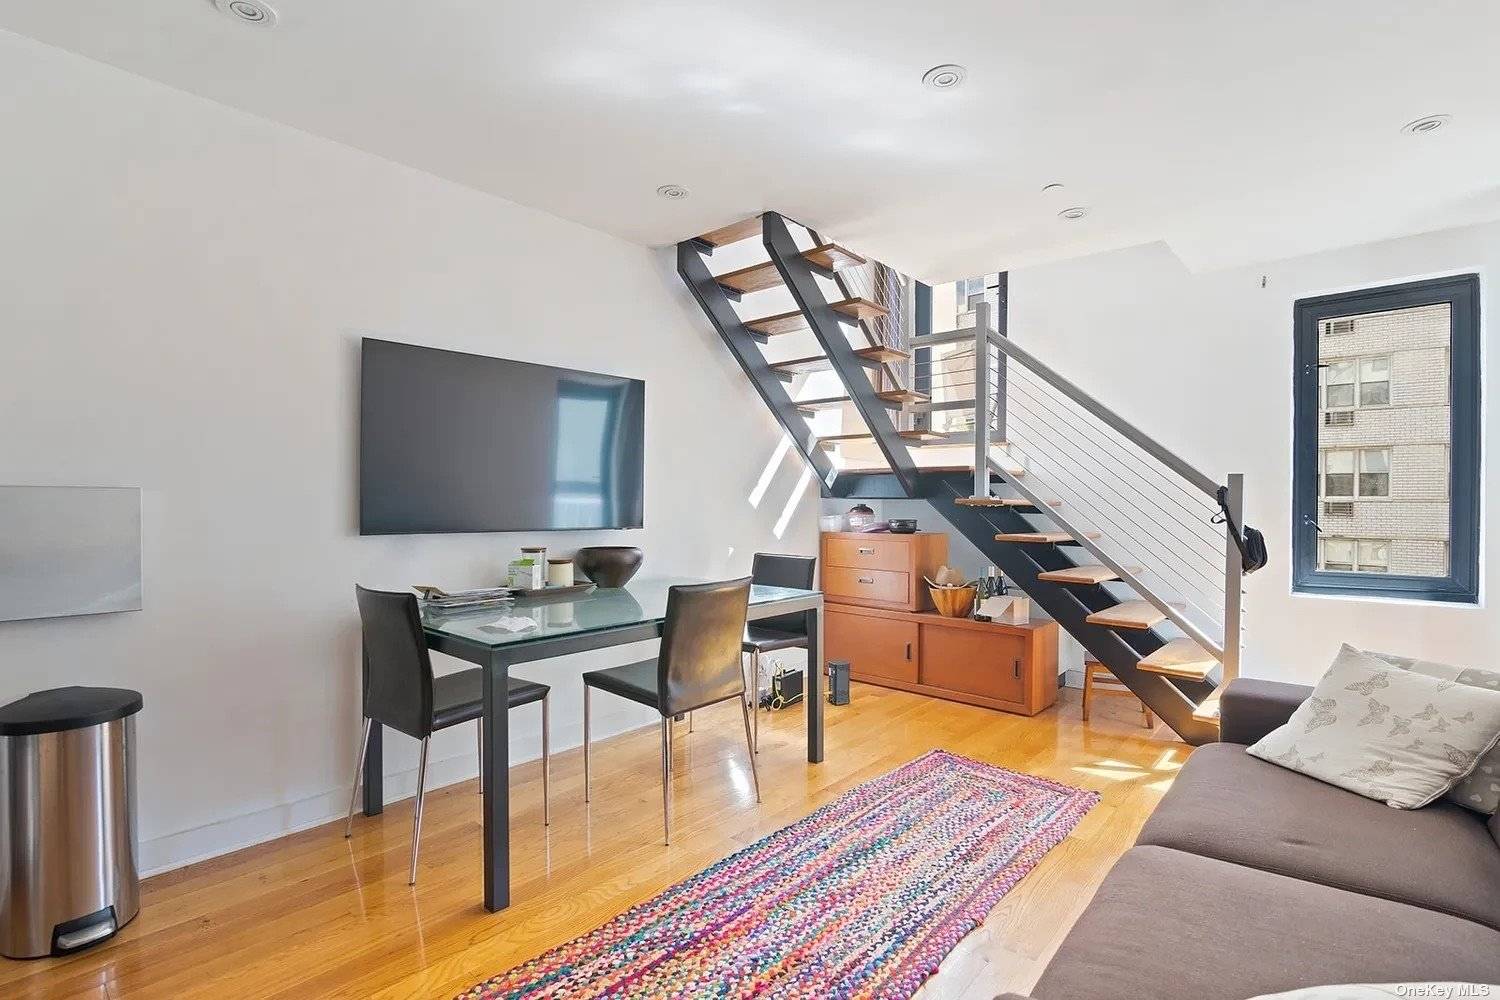 Sunny, south facing one bedroom, one and a half bathroom duplex apartment with two outdoor spaces located in the heart of the Upper East Side.